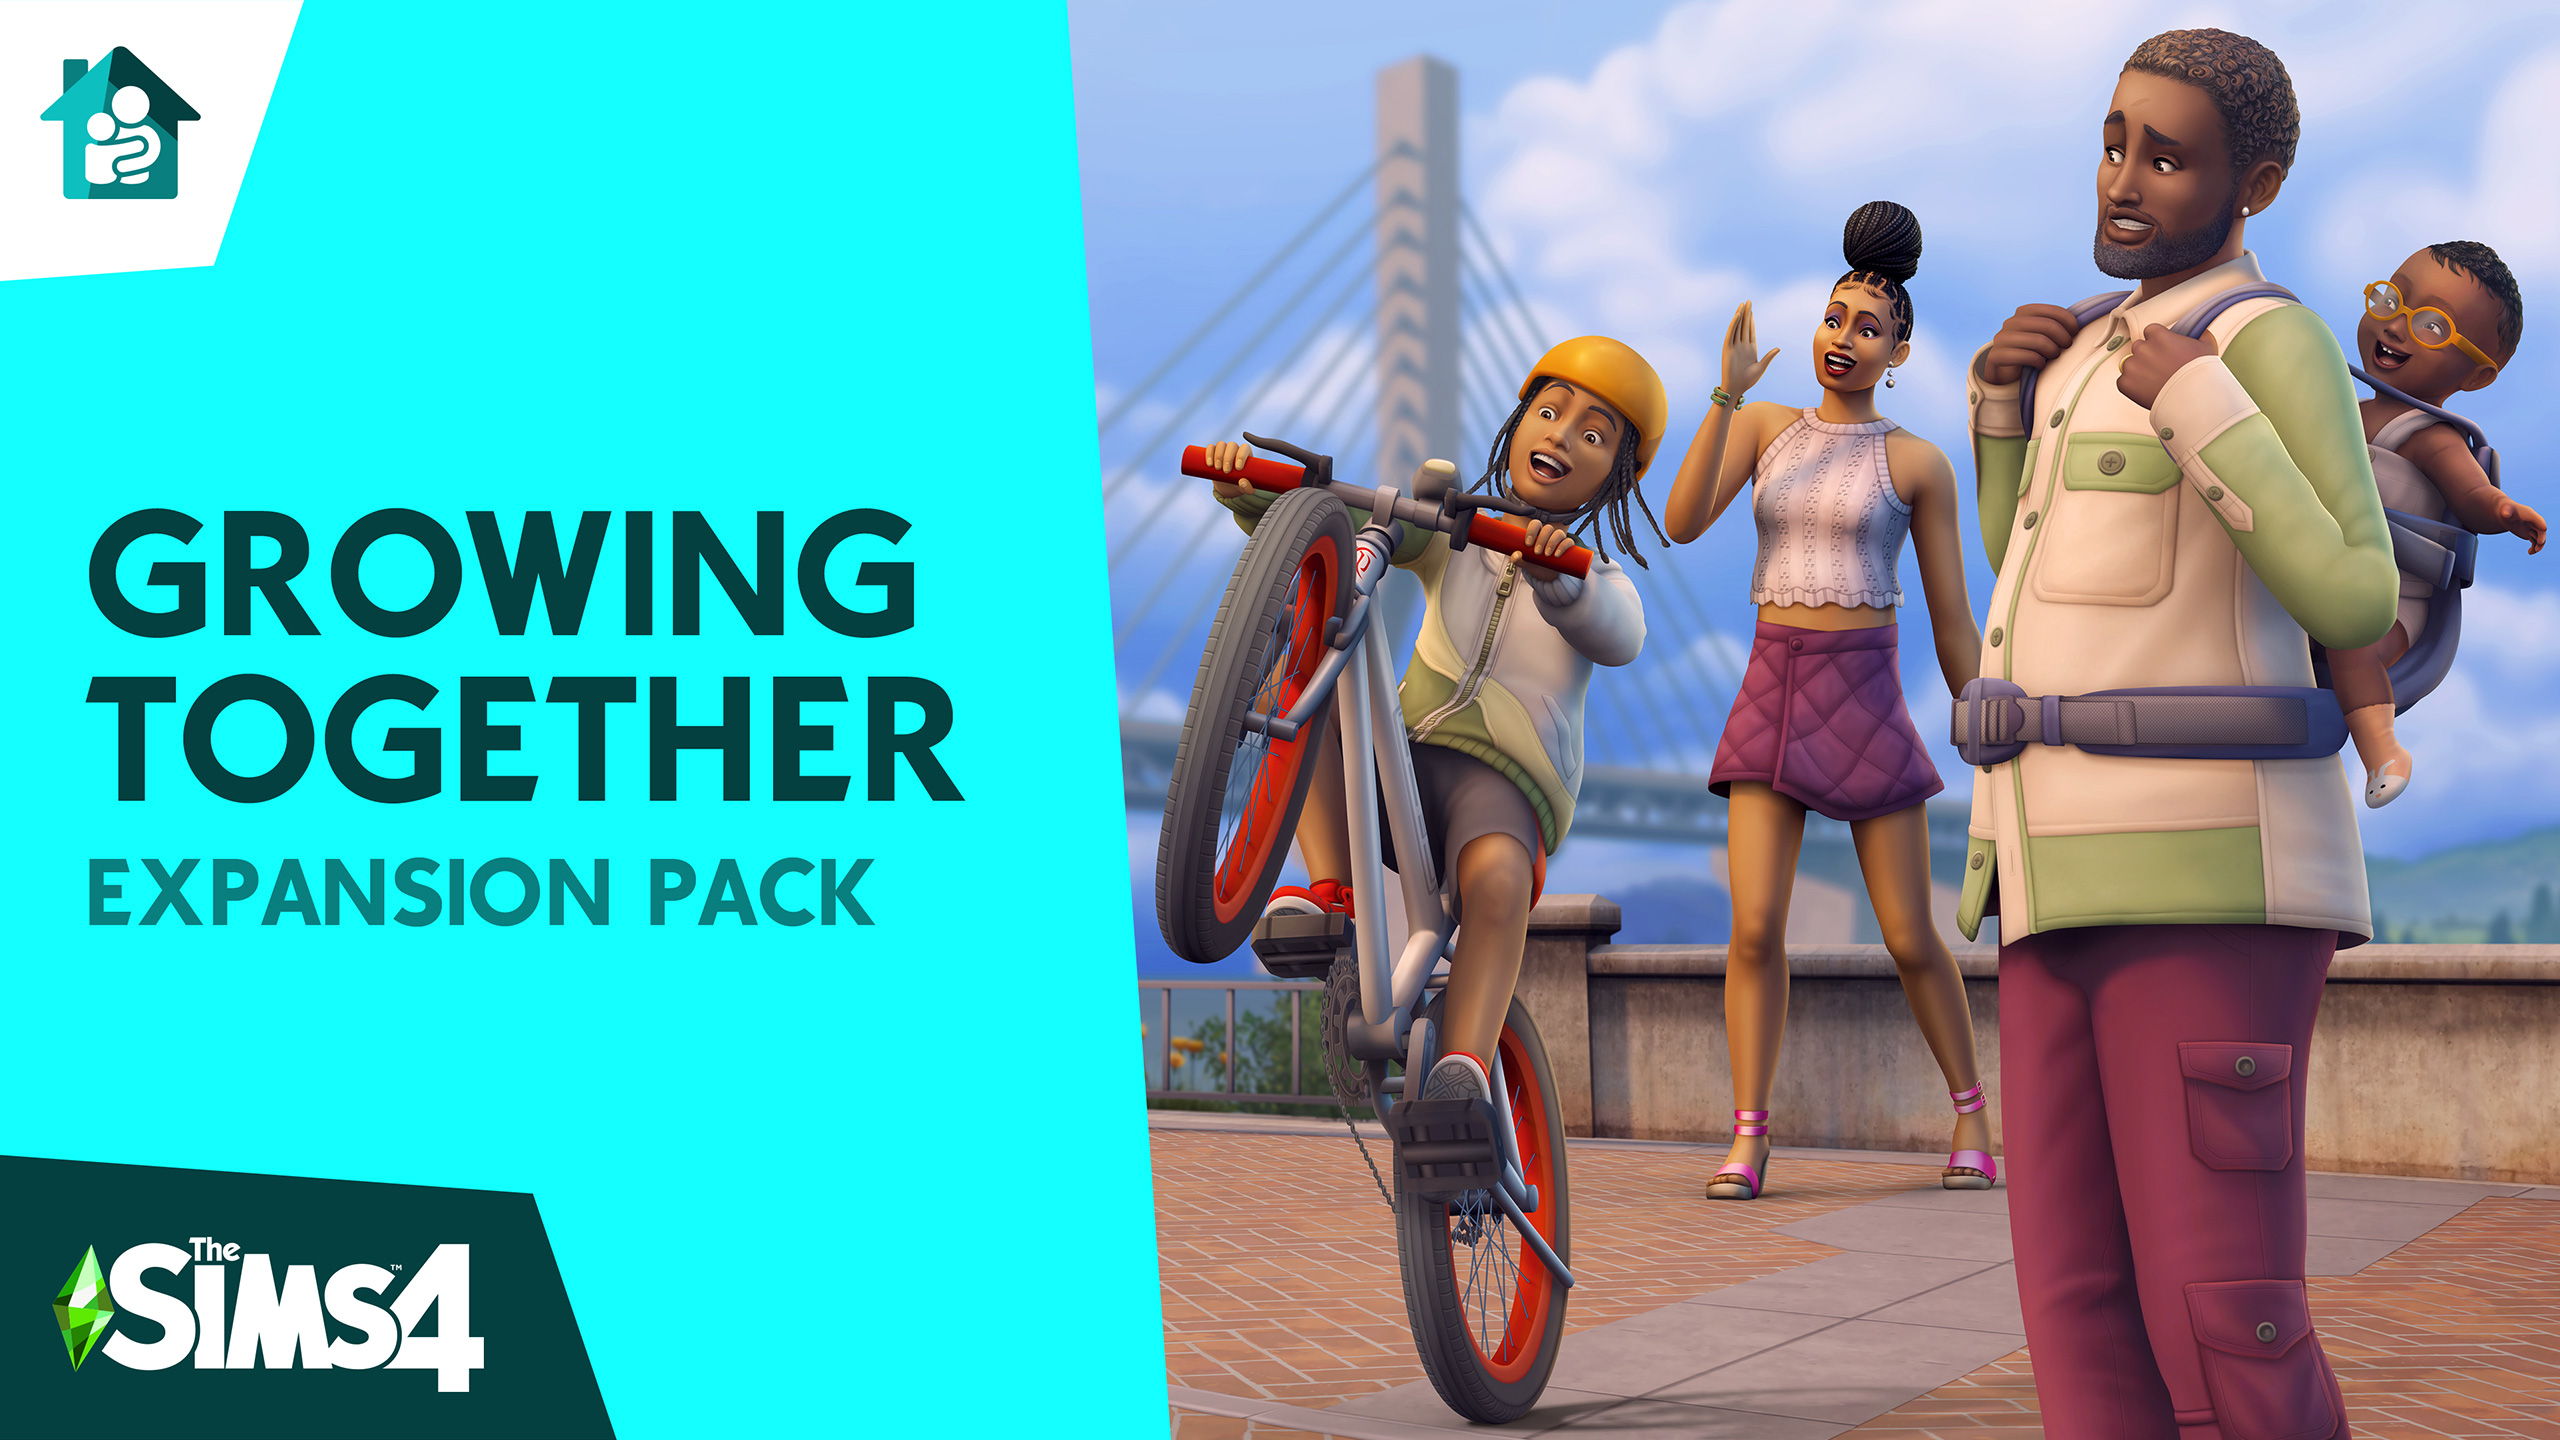 The Sims 4: Growing Together Expansion Pack - Xbox One